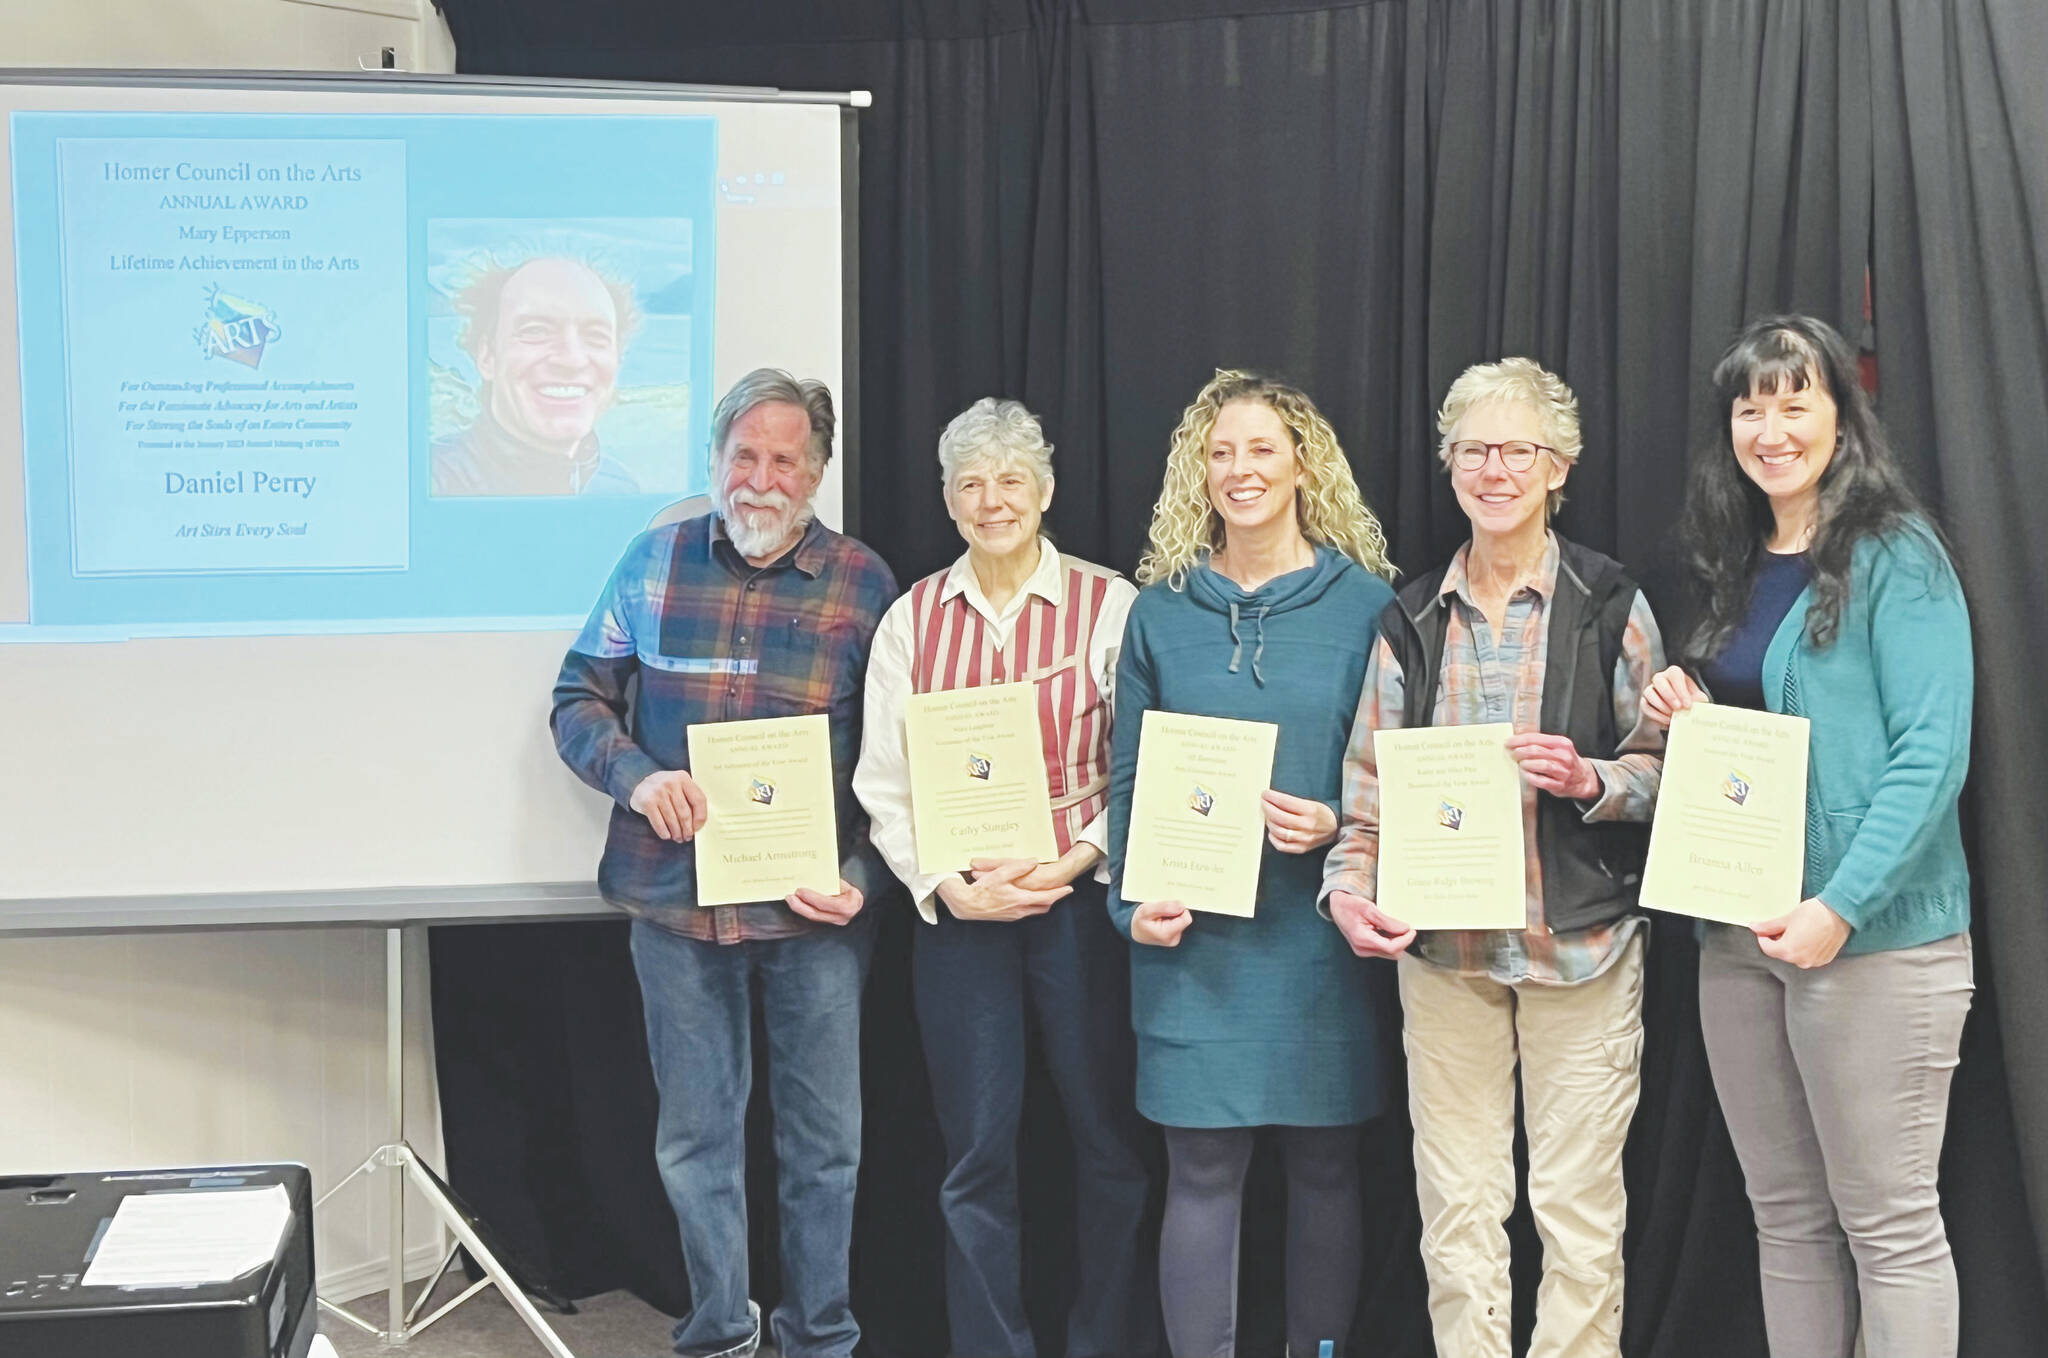 (from left to right) HCOA Community Arts Awardees Daniel Perry (pictured on screen), Michael Armstrong, Cathy Stingley, Krista Etzweiler, Sherry Stead and Brianna Allen pose with their awards at the HCOA annual meeting Friday.